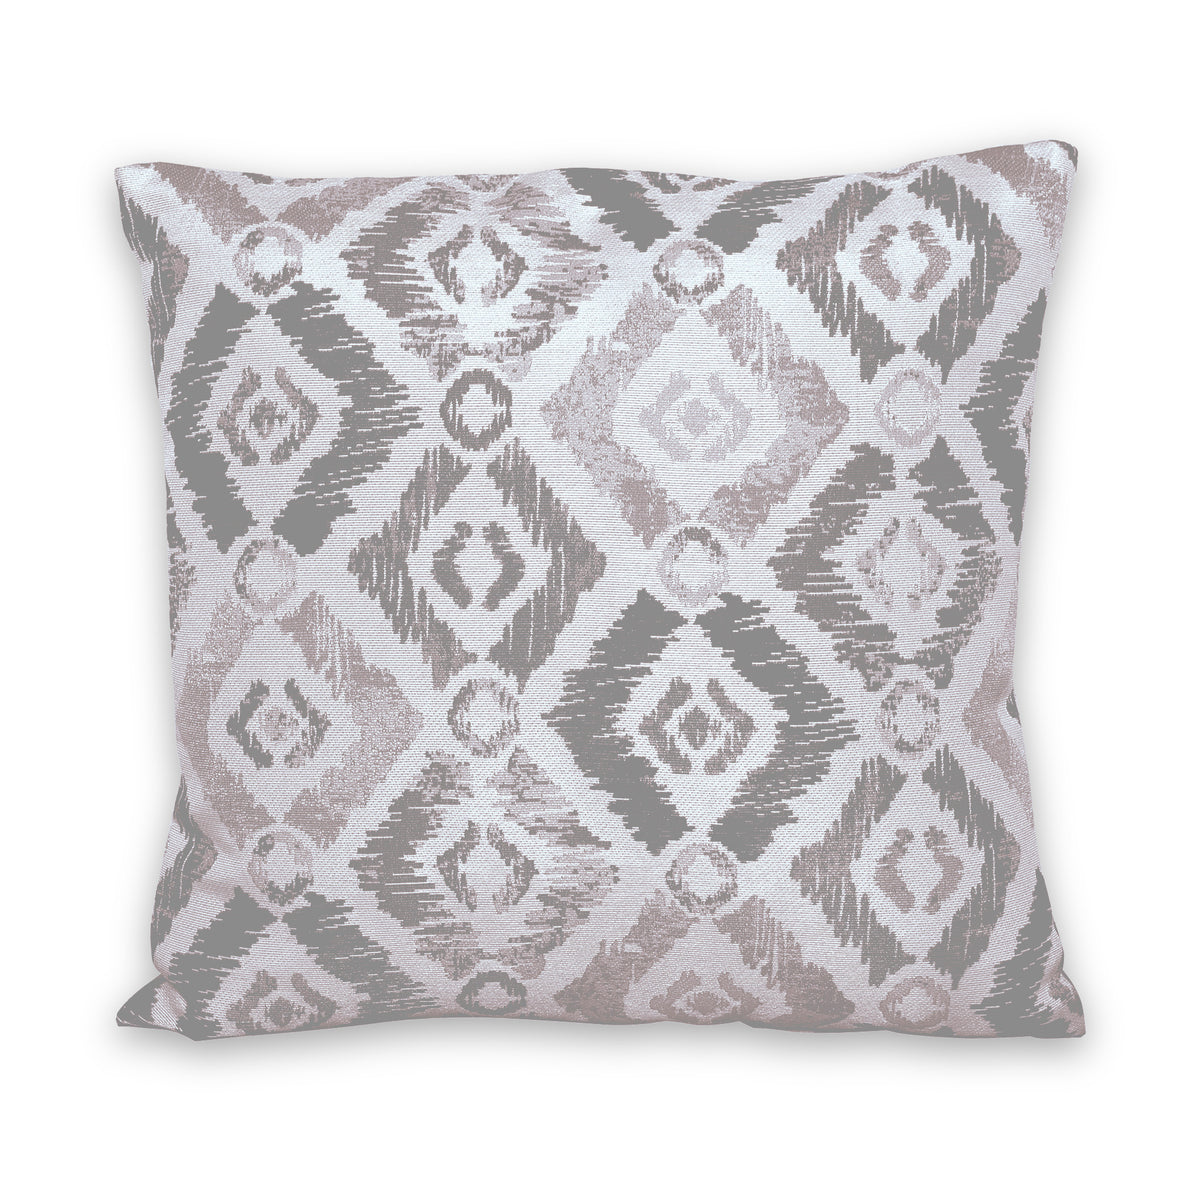 Outdoor Grey Patterned Scatter Cushion from Roseland